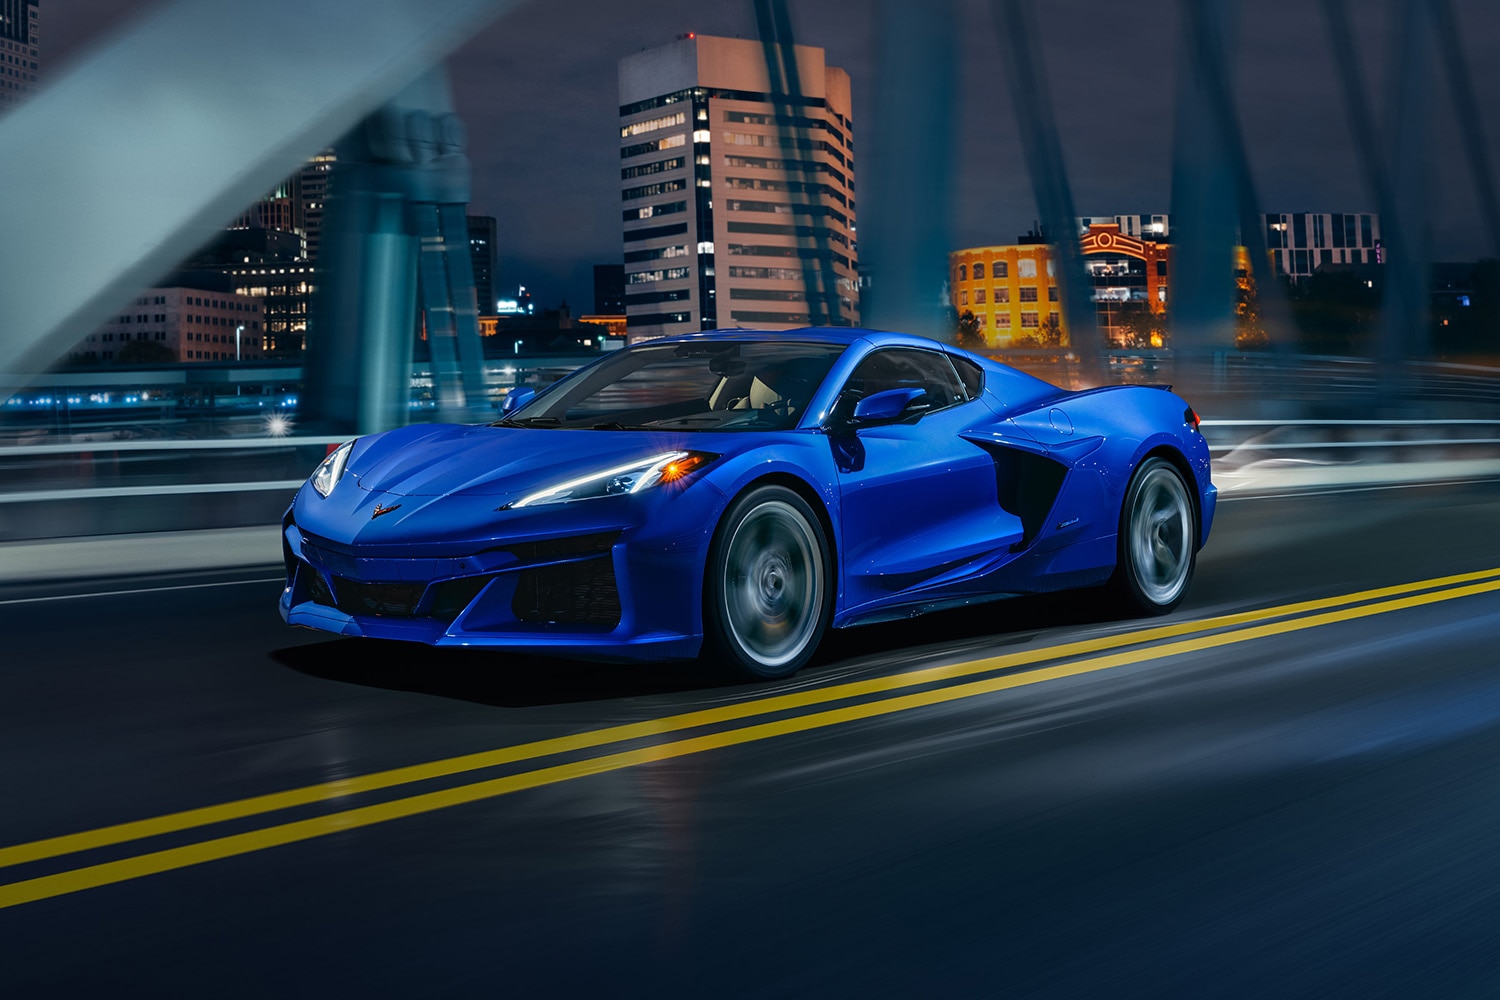 2024 Chevrolet Corvette E-Ray in Riptide Blue driving along a bridge at night with high-rises in the background